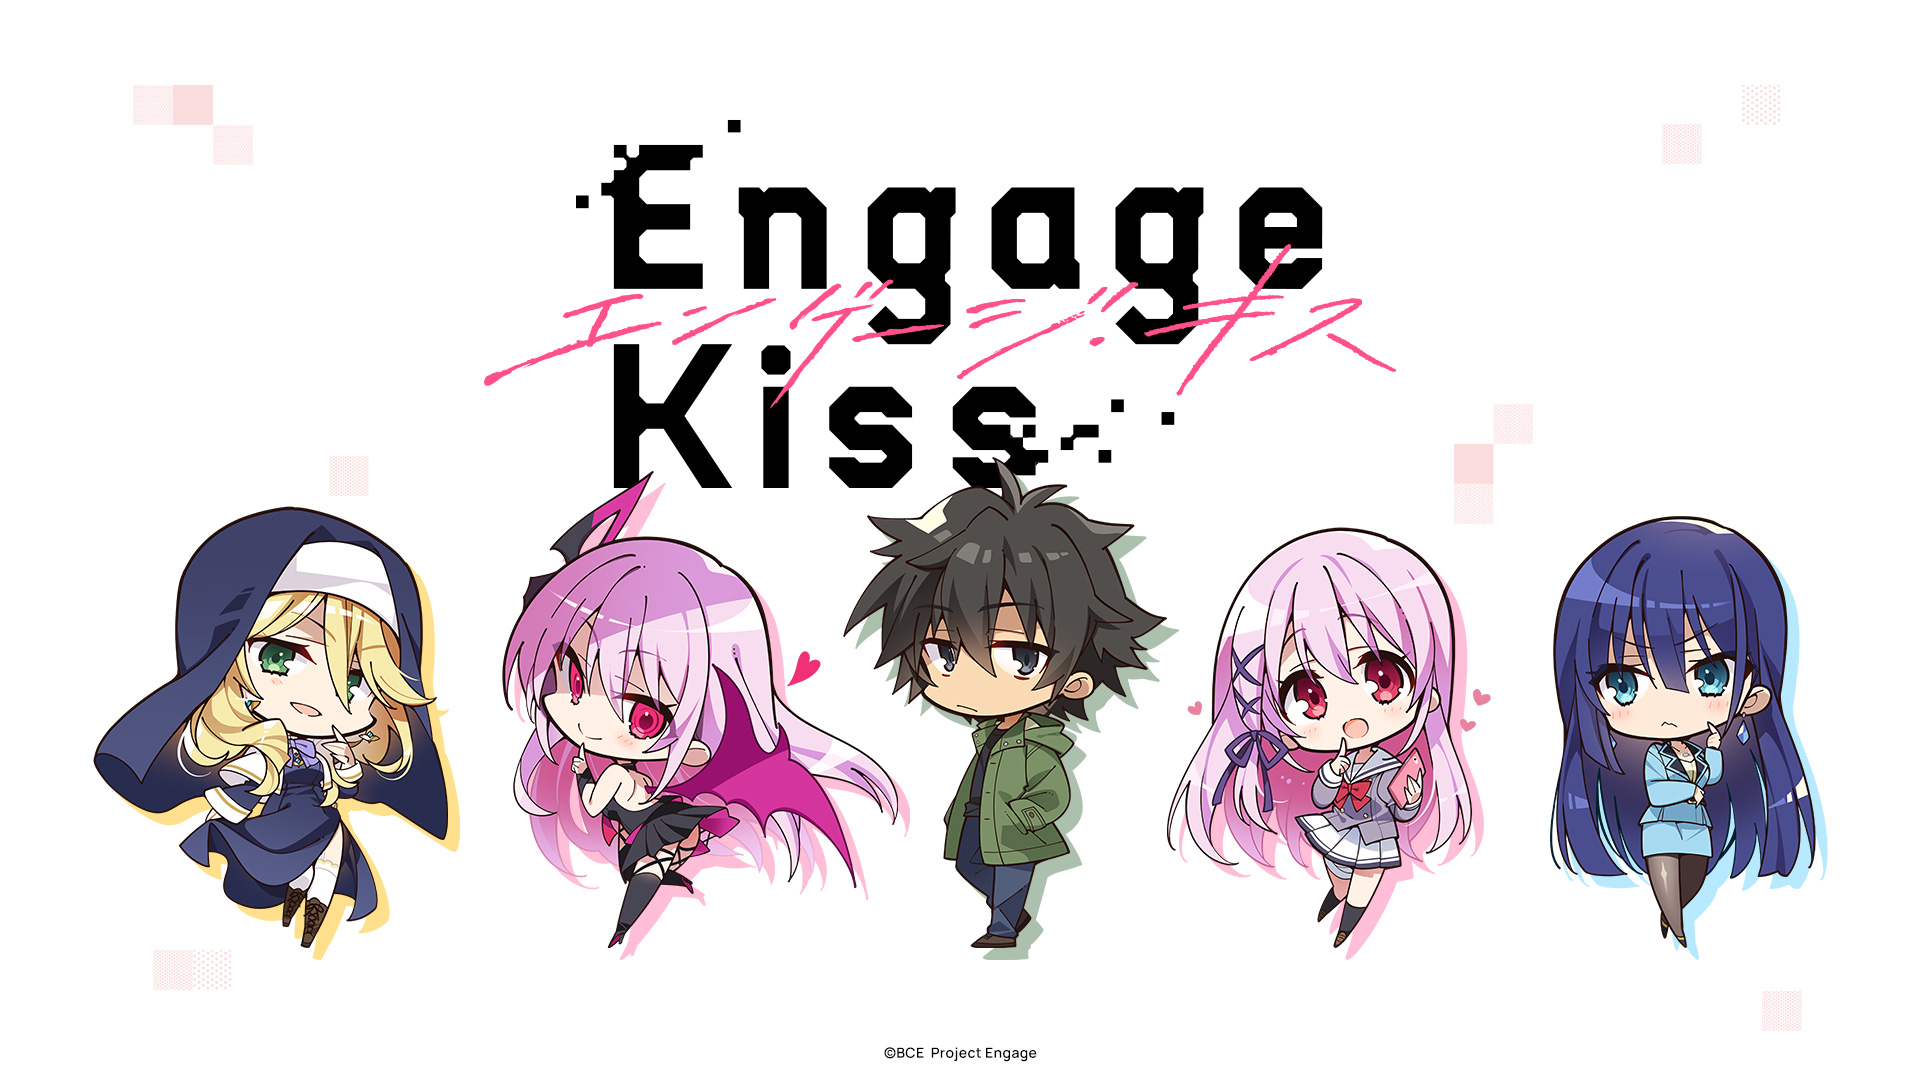 Special Tvアニメ Engage Kiss 公式サイト